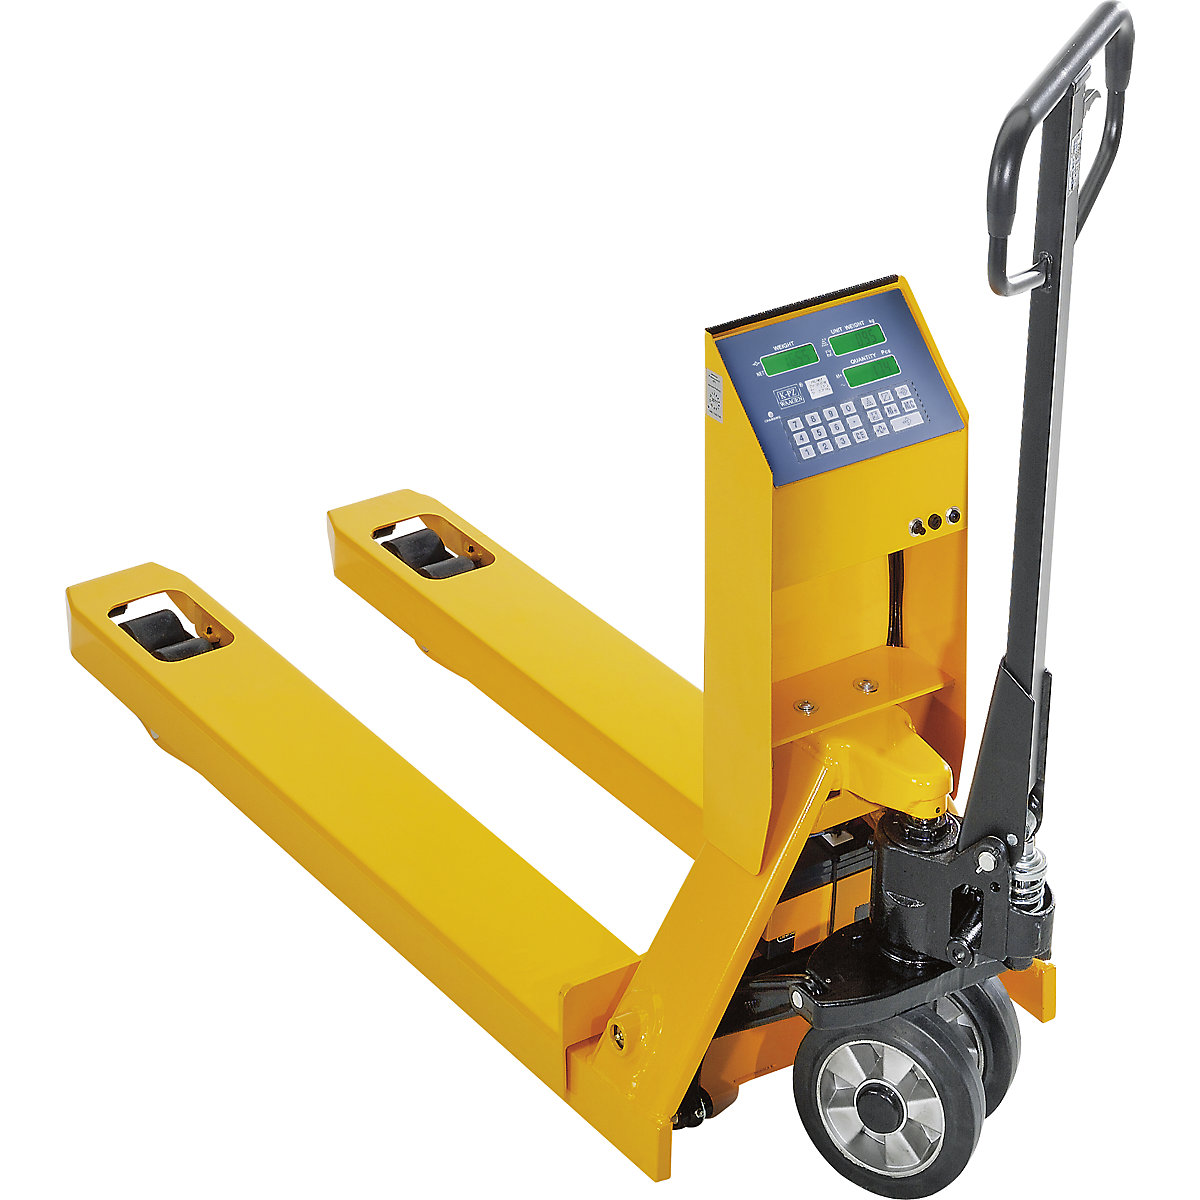 Pallet truck with precision scale